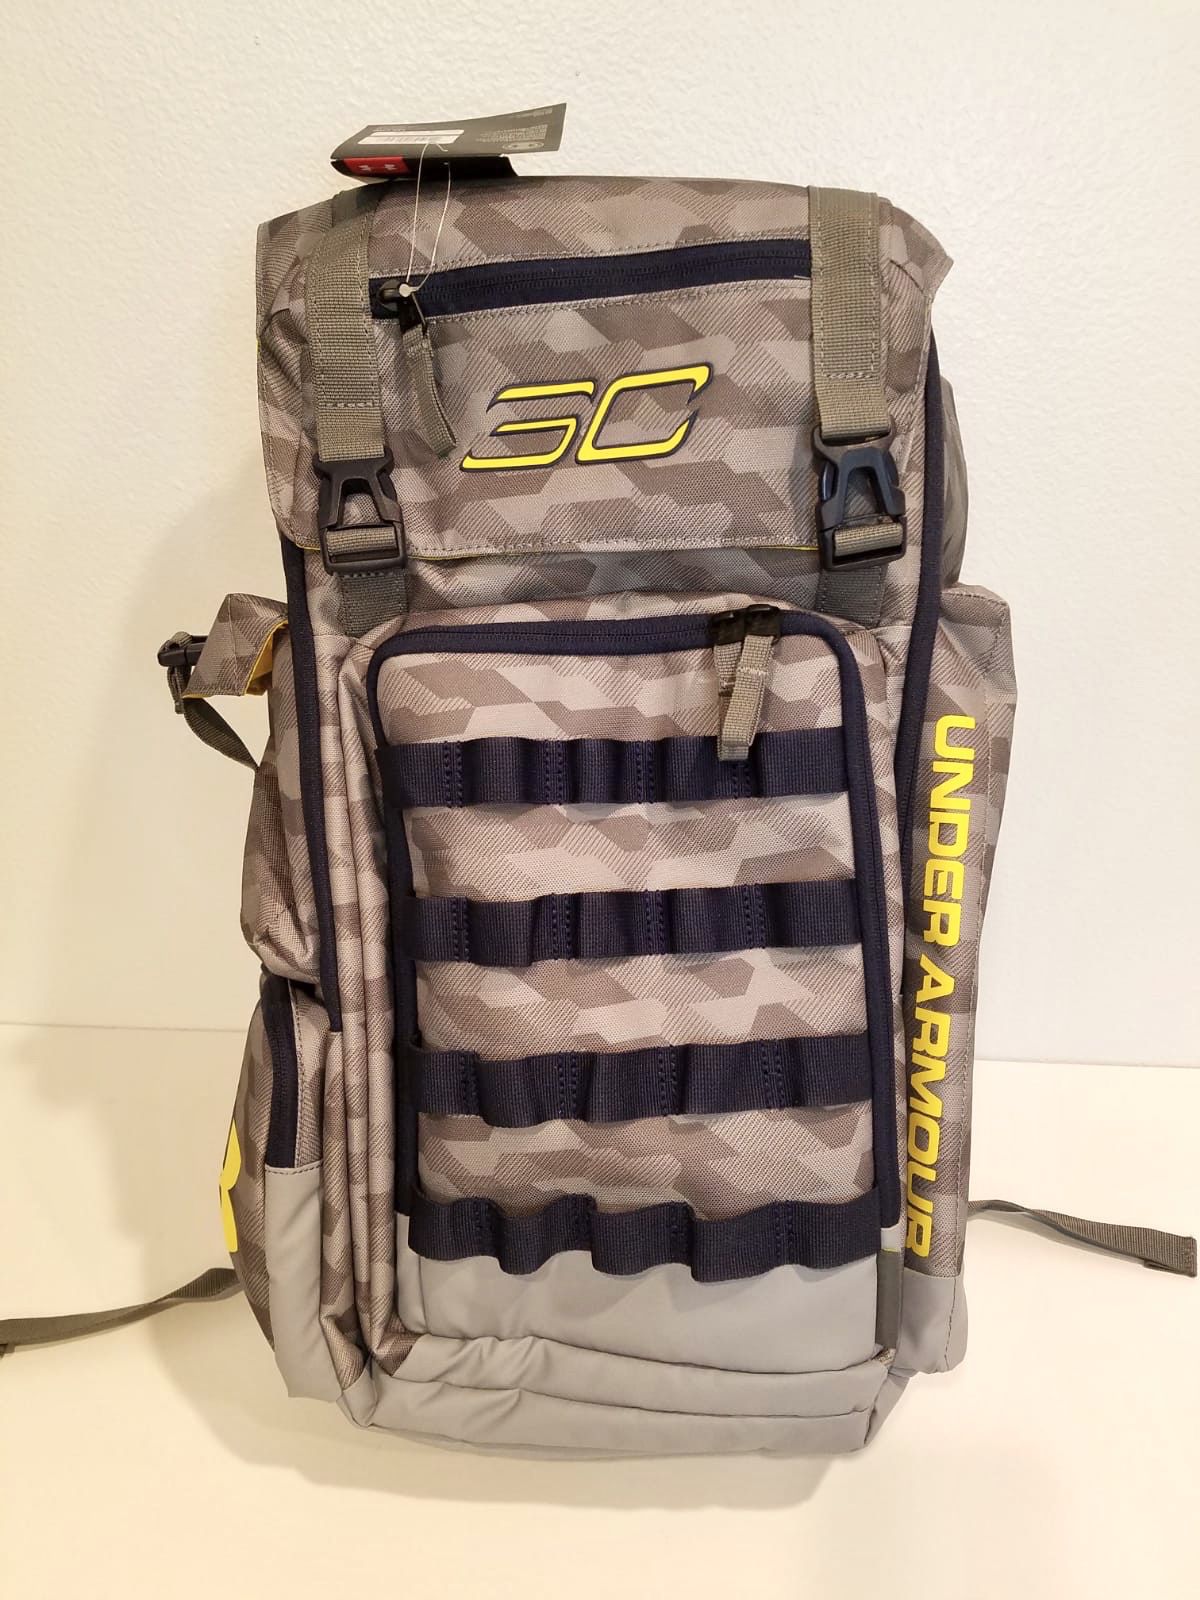 Under SC30 UA SC Undeniable Backpack Basketball Bag NWT 1262140 009 for Sale in Cypress, - OfferUp